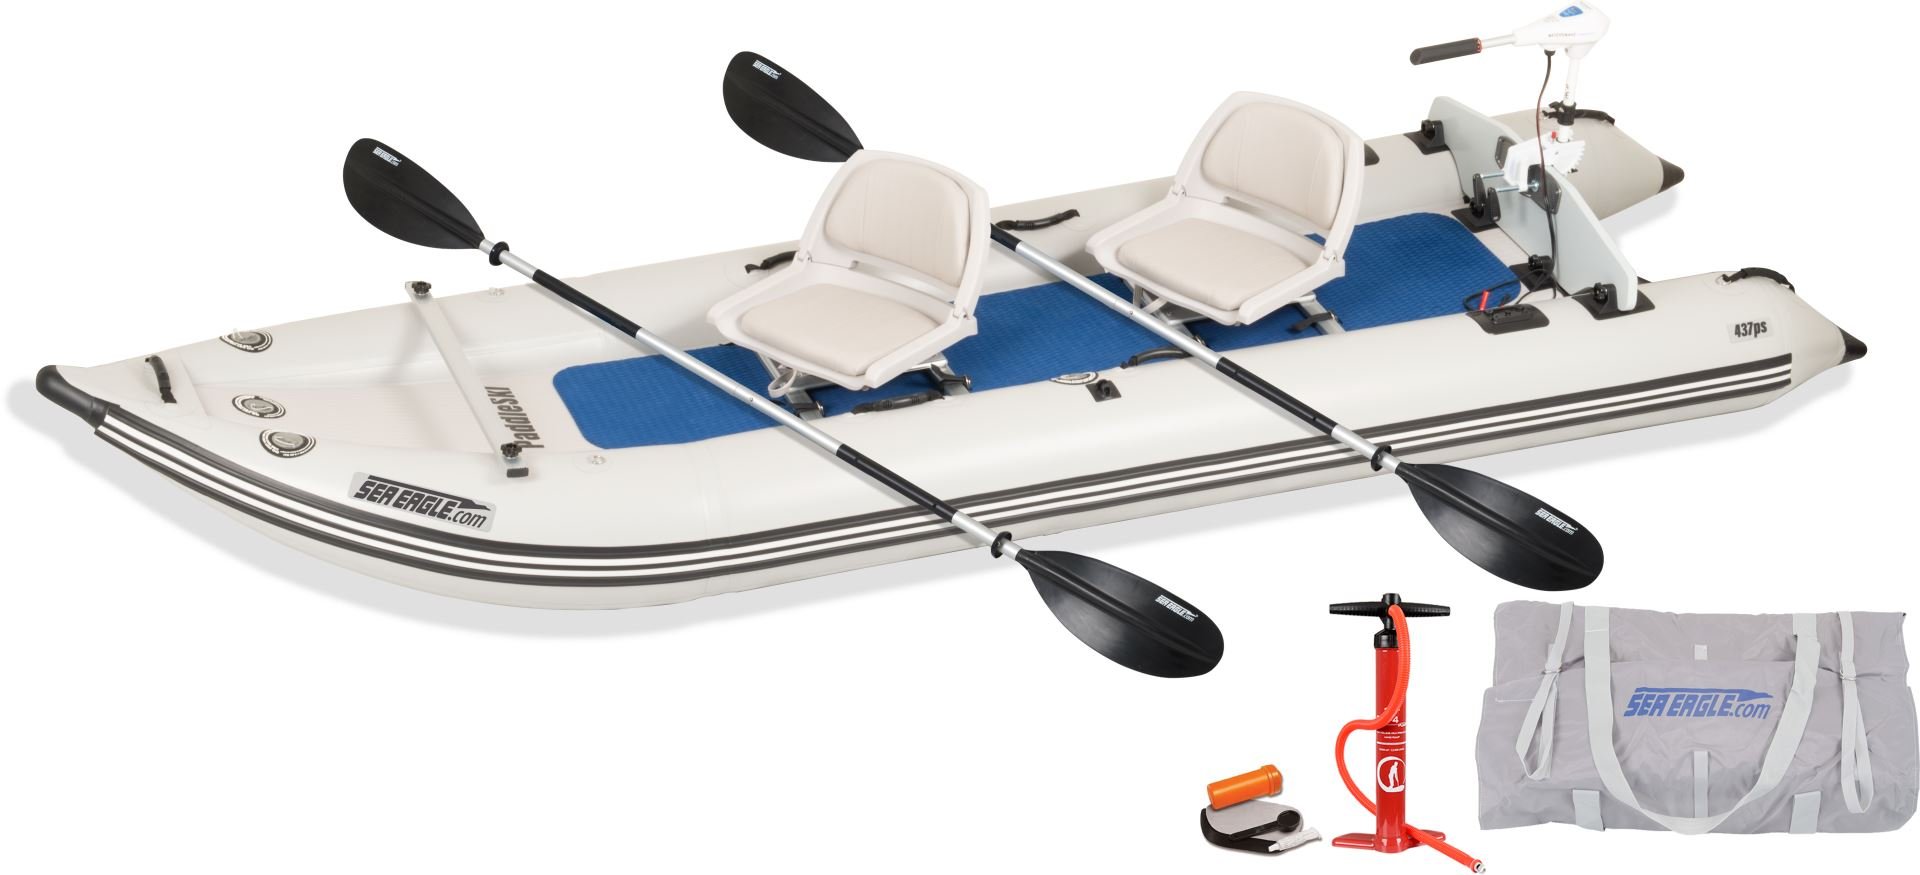 Sea Eagle 437PS PaddleSki Inflatable Boat Watersnake Motor Package - Sunzout Outdoor Spaces LLC